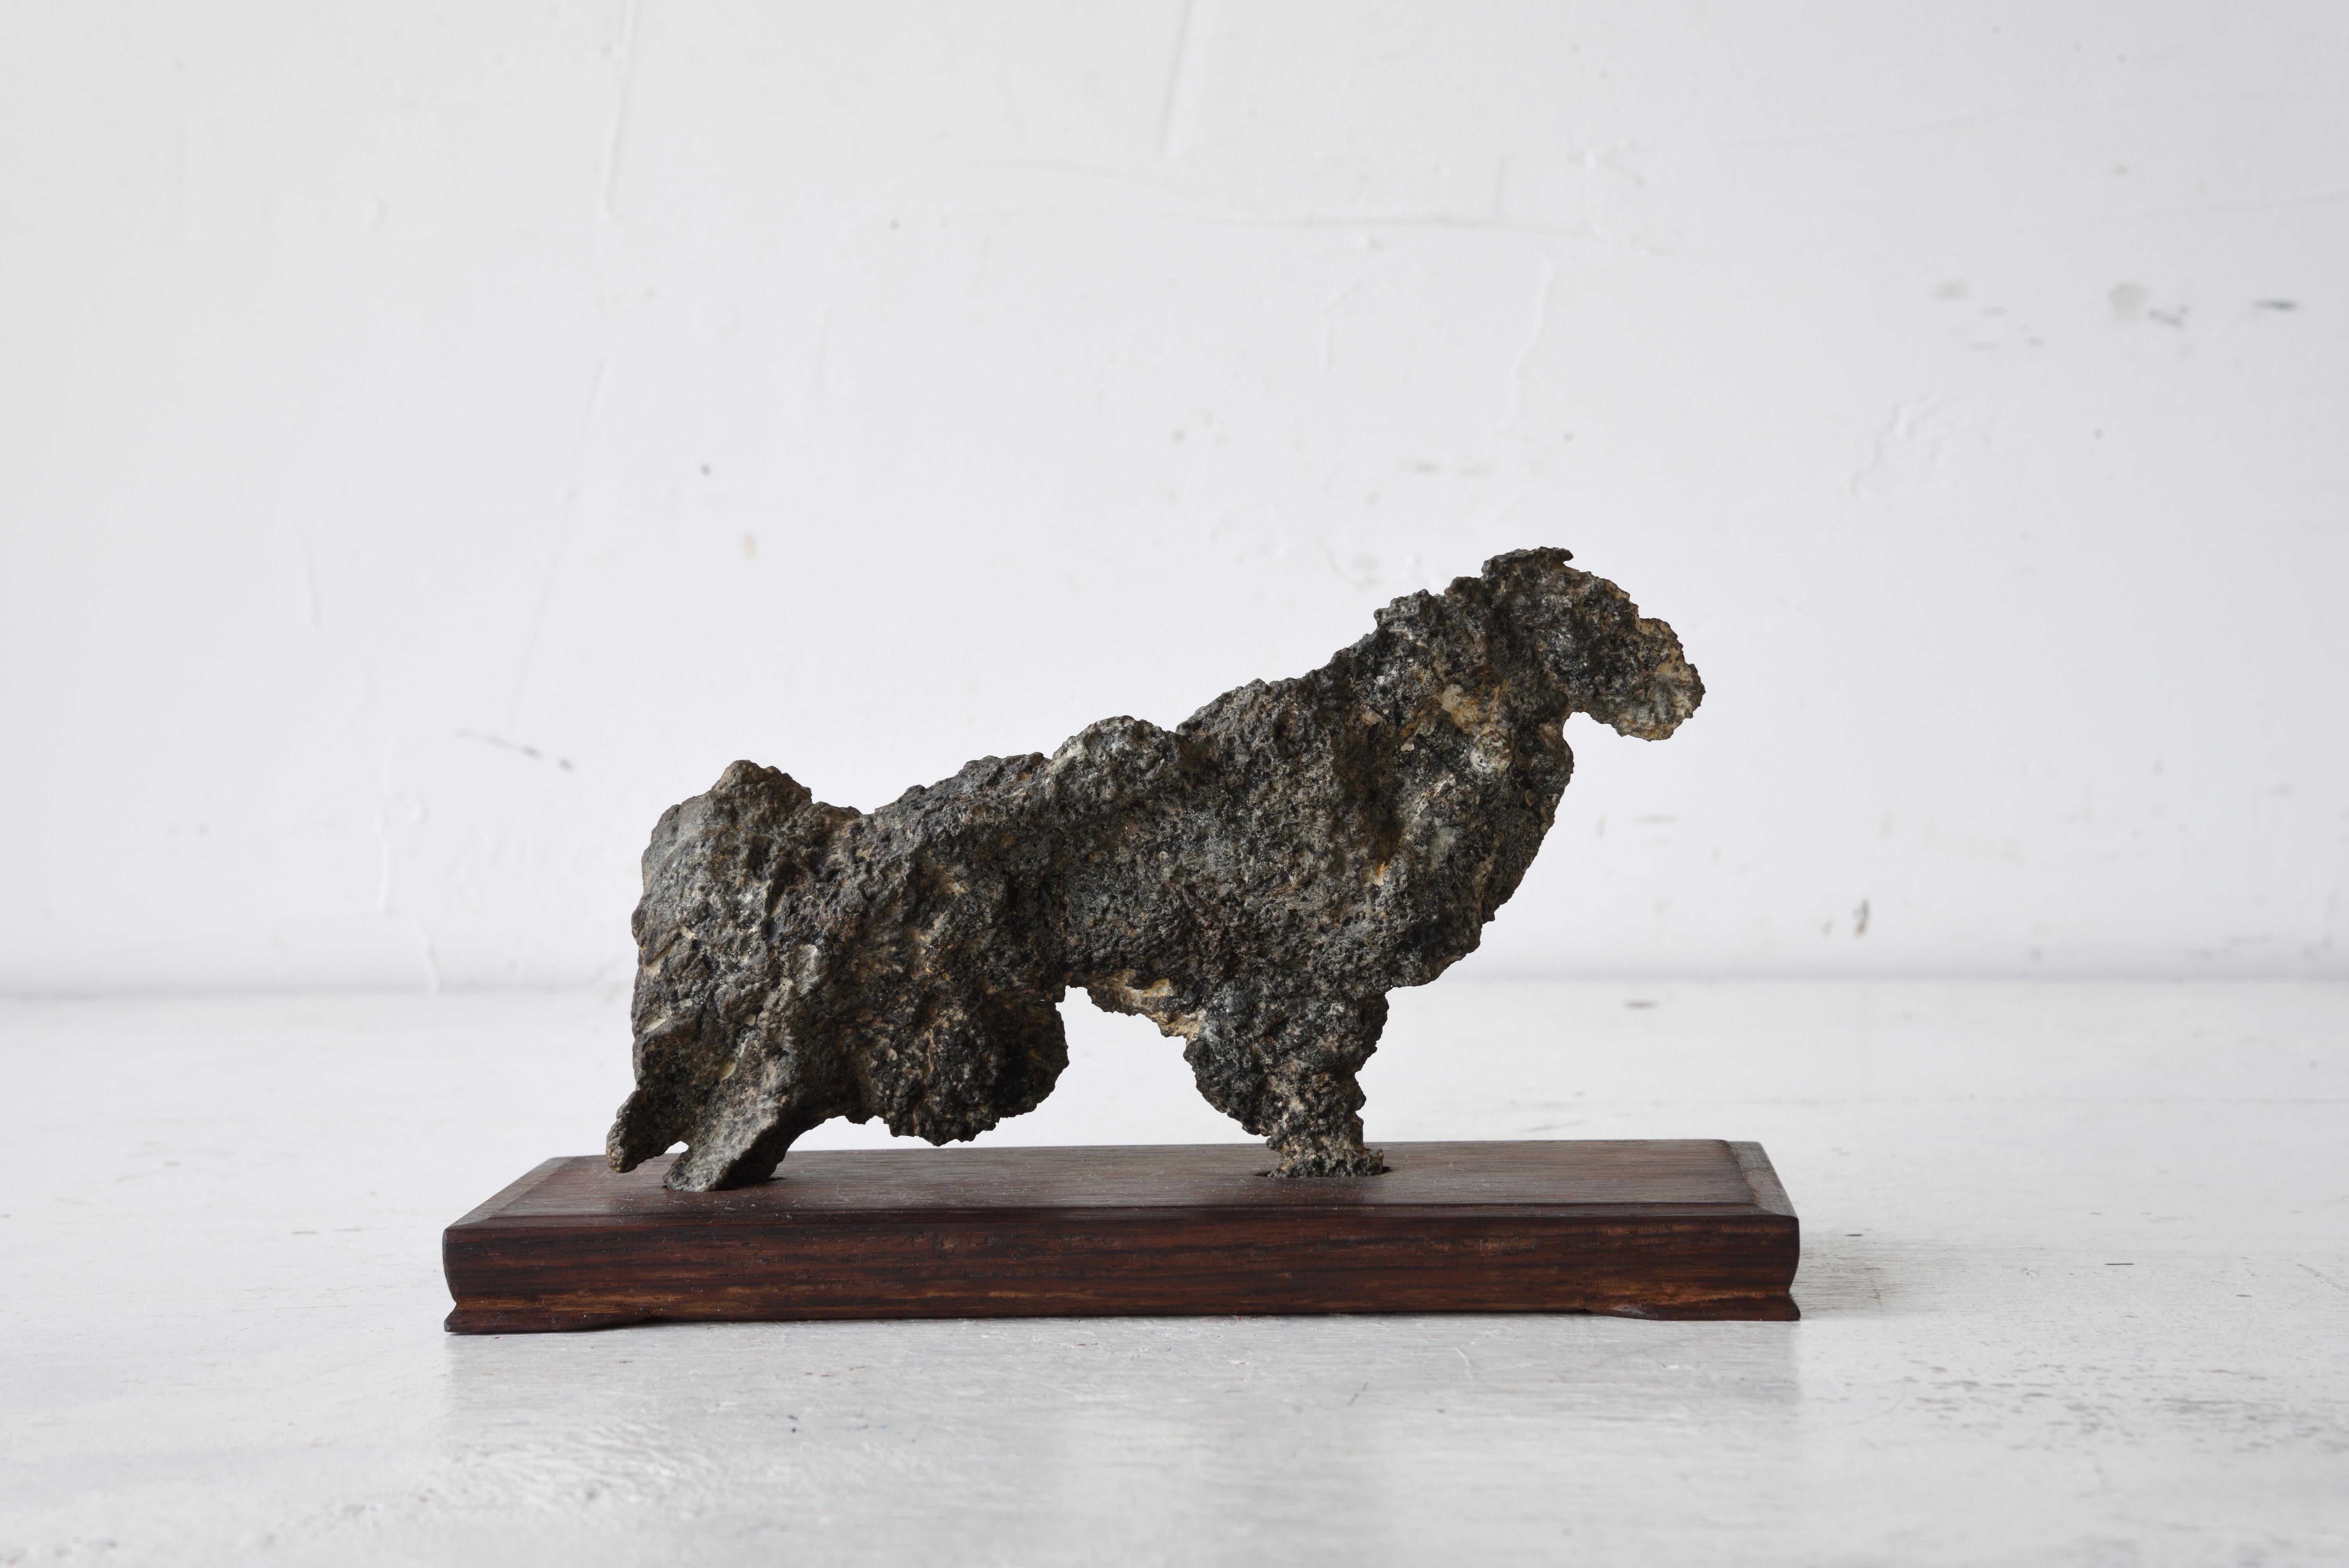 SUISEKI, BEAST – Supernatural abstract stone like a four‐footed creature with completely no processing by human hands, except the arrangement attaching to a custom-made wooden stand as an Art of Japanese ‘Suiseki’. Total size with stand: 17.3 x 7 x